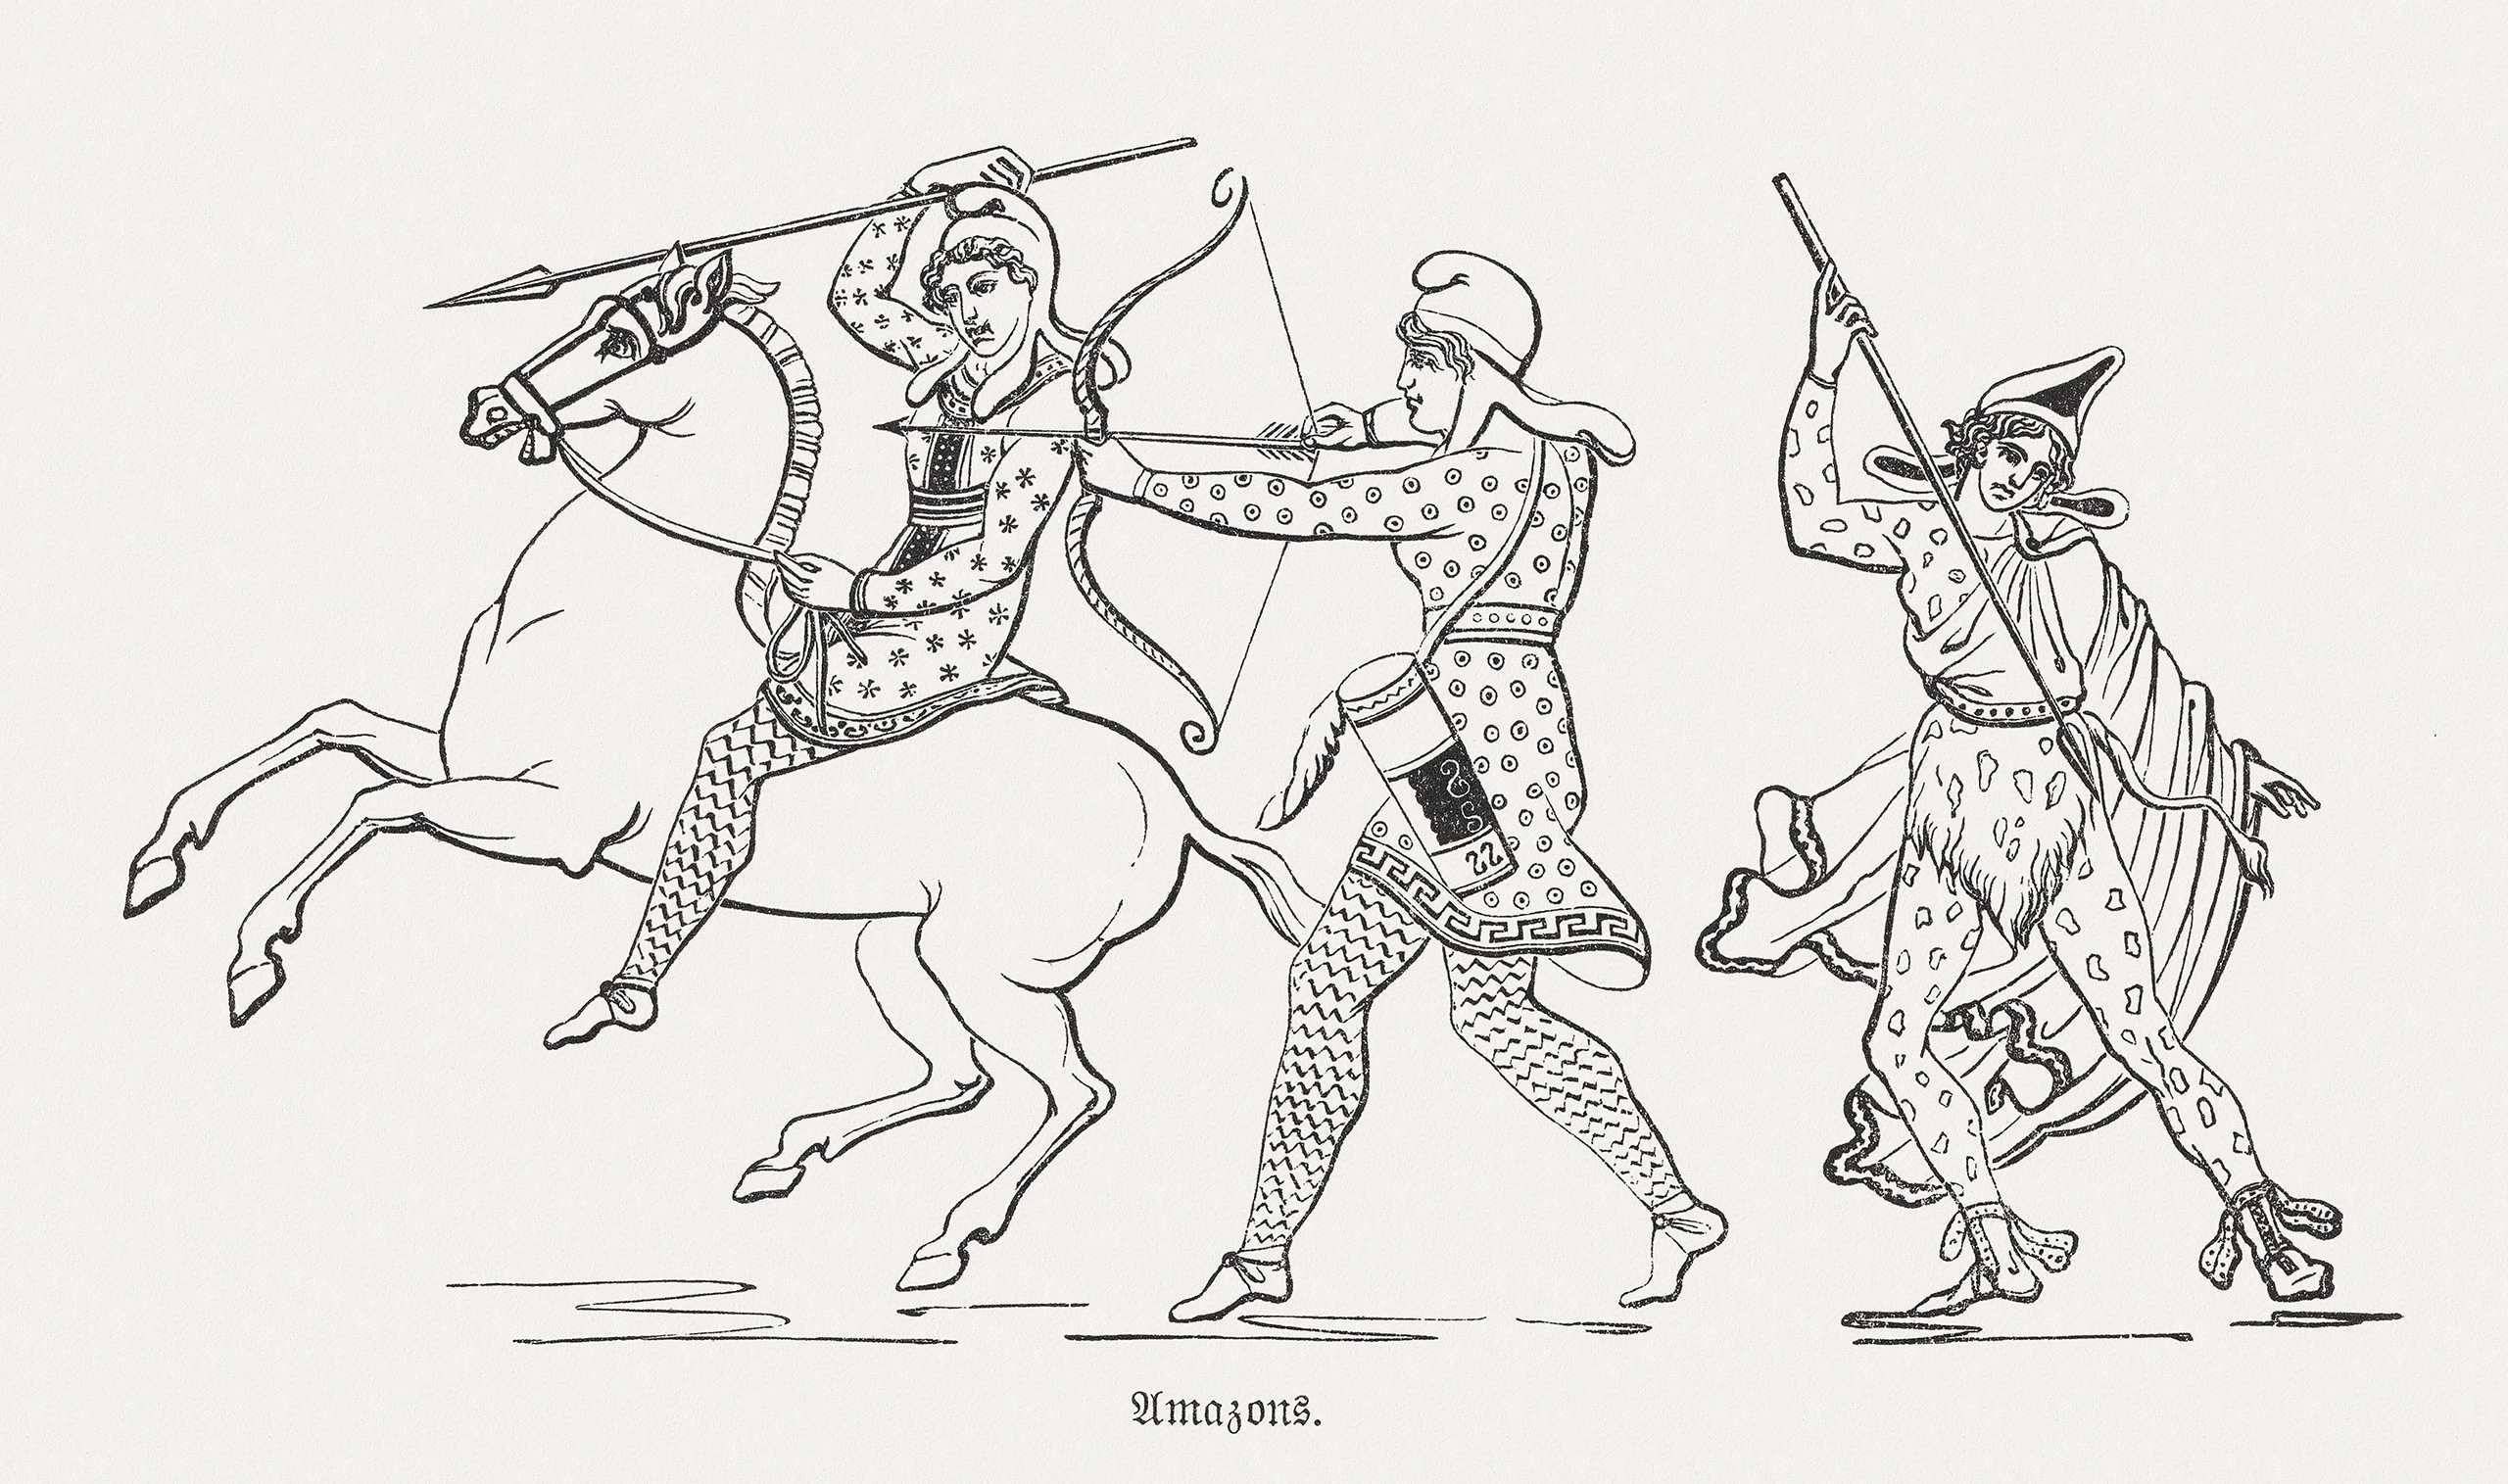 Amazon queen and amazons depicted in a wood engraving, 1880. (ZU_09/Getty Images)